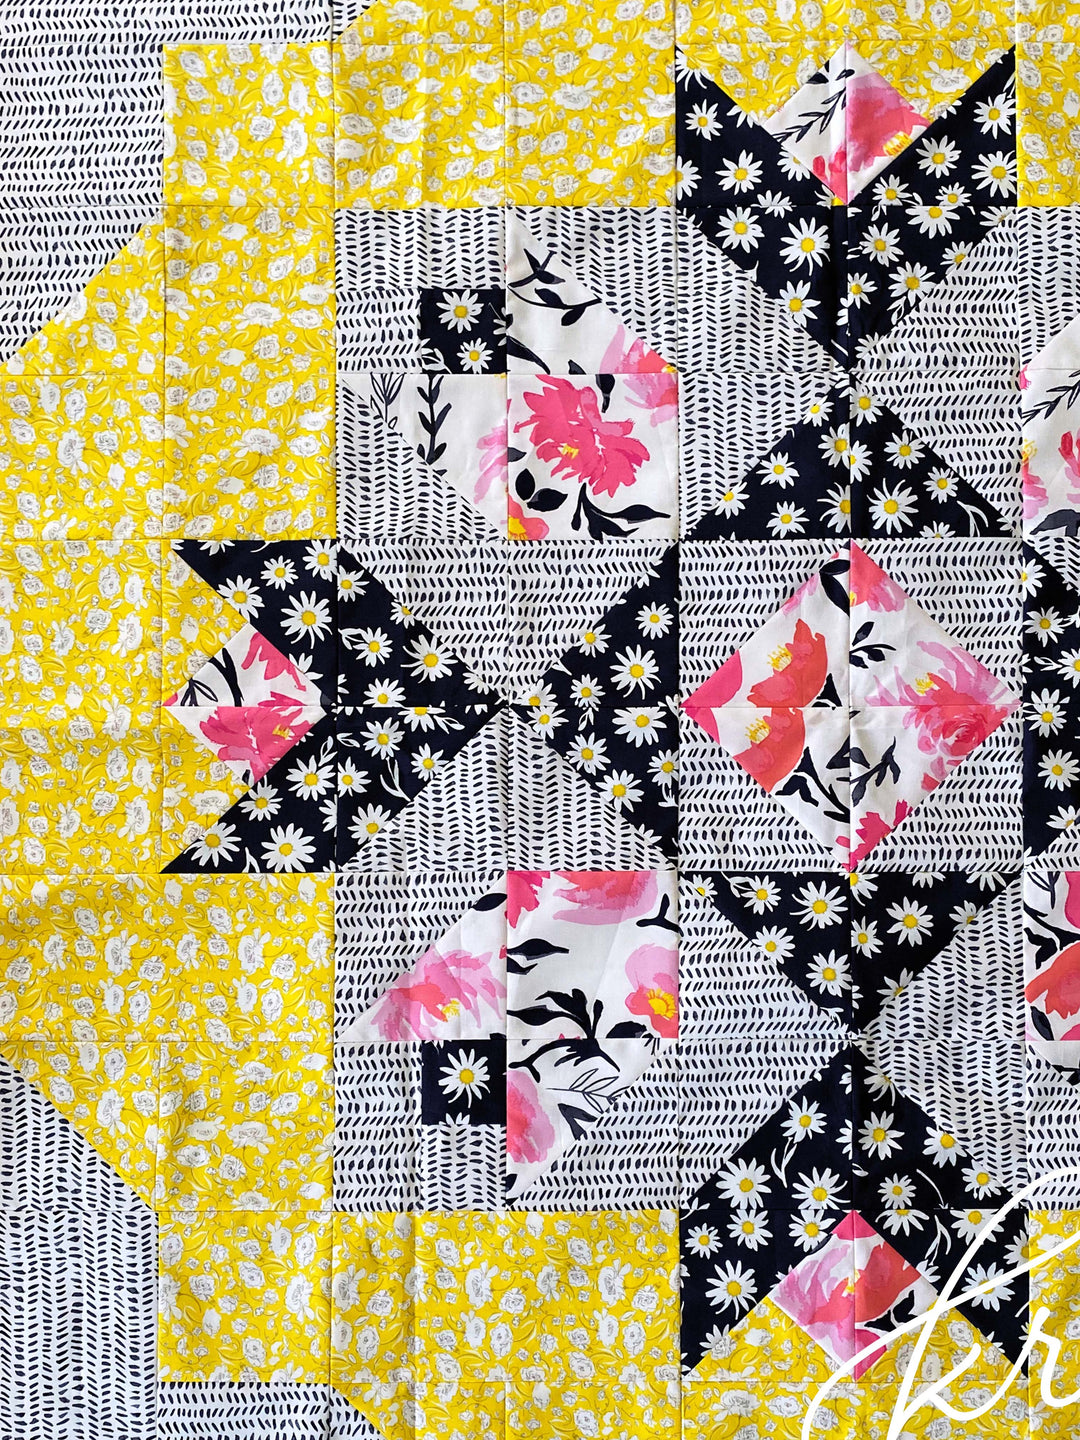 New... The First Bloom Quilt